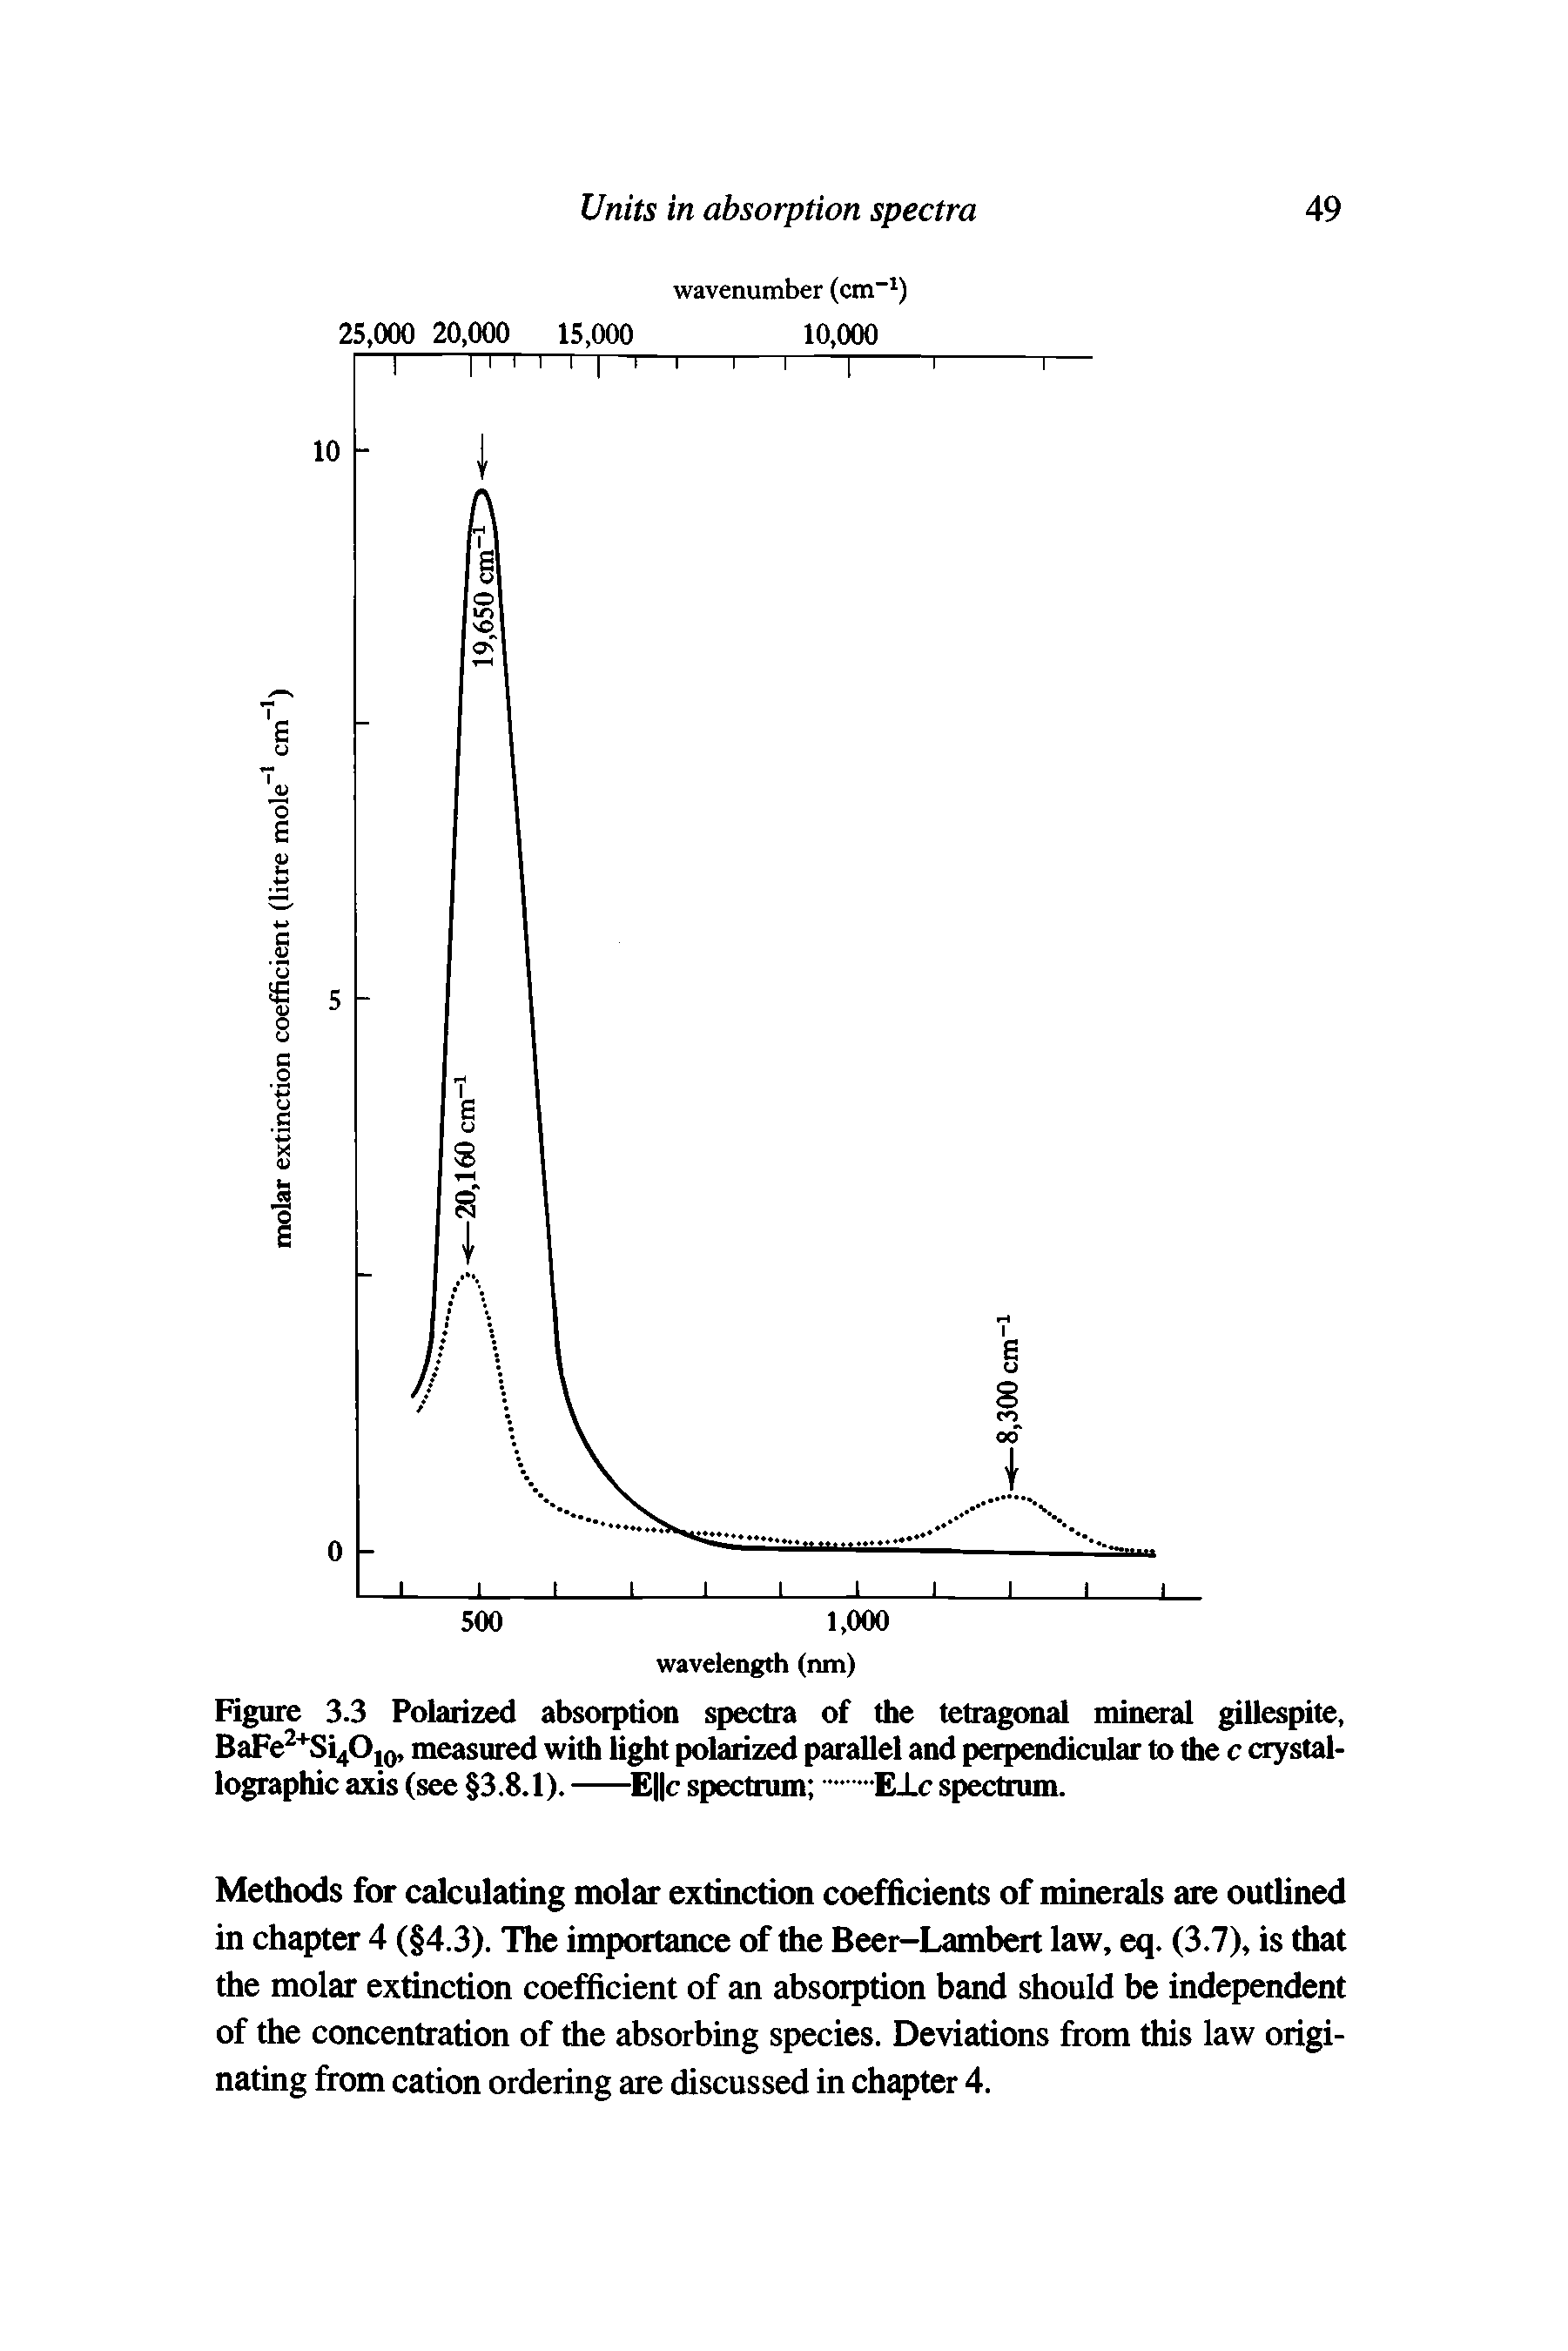 Figure 3.3 Polarized absorption spectra of the tetragonal mineral gillespite, BaFe2+Si4OI0, measured with light polarized parallel and perpendicular to the c crystallographic axis (see 3.8.1).-E c spectrum ..E-Lc spectrum.